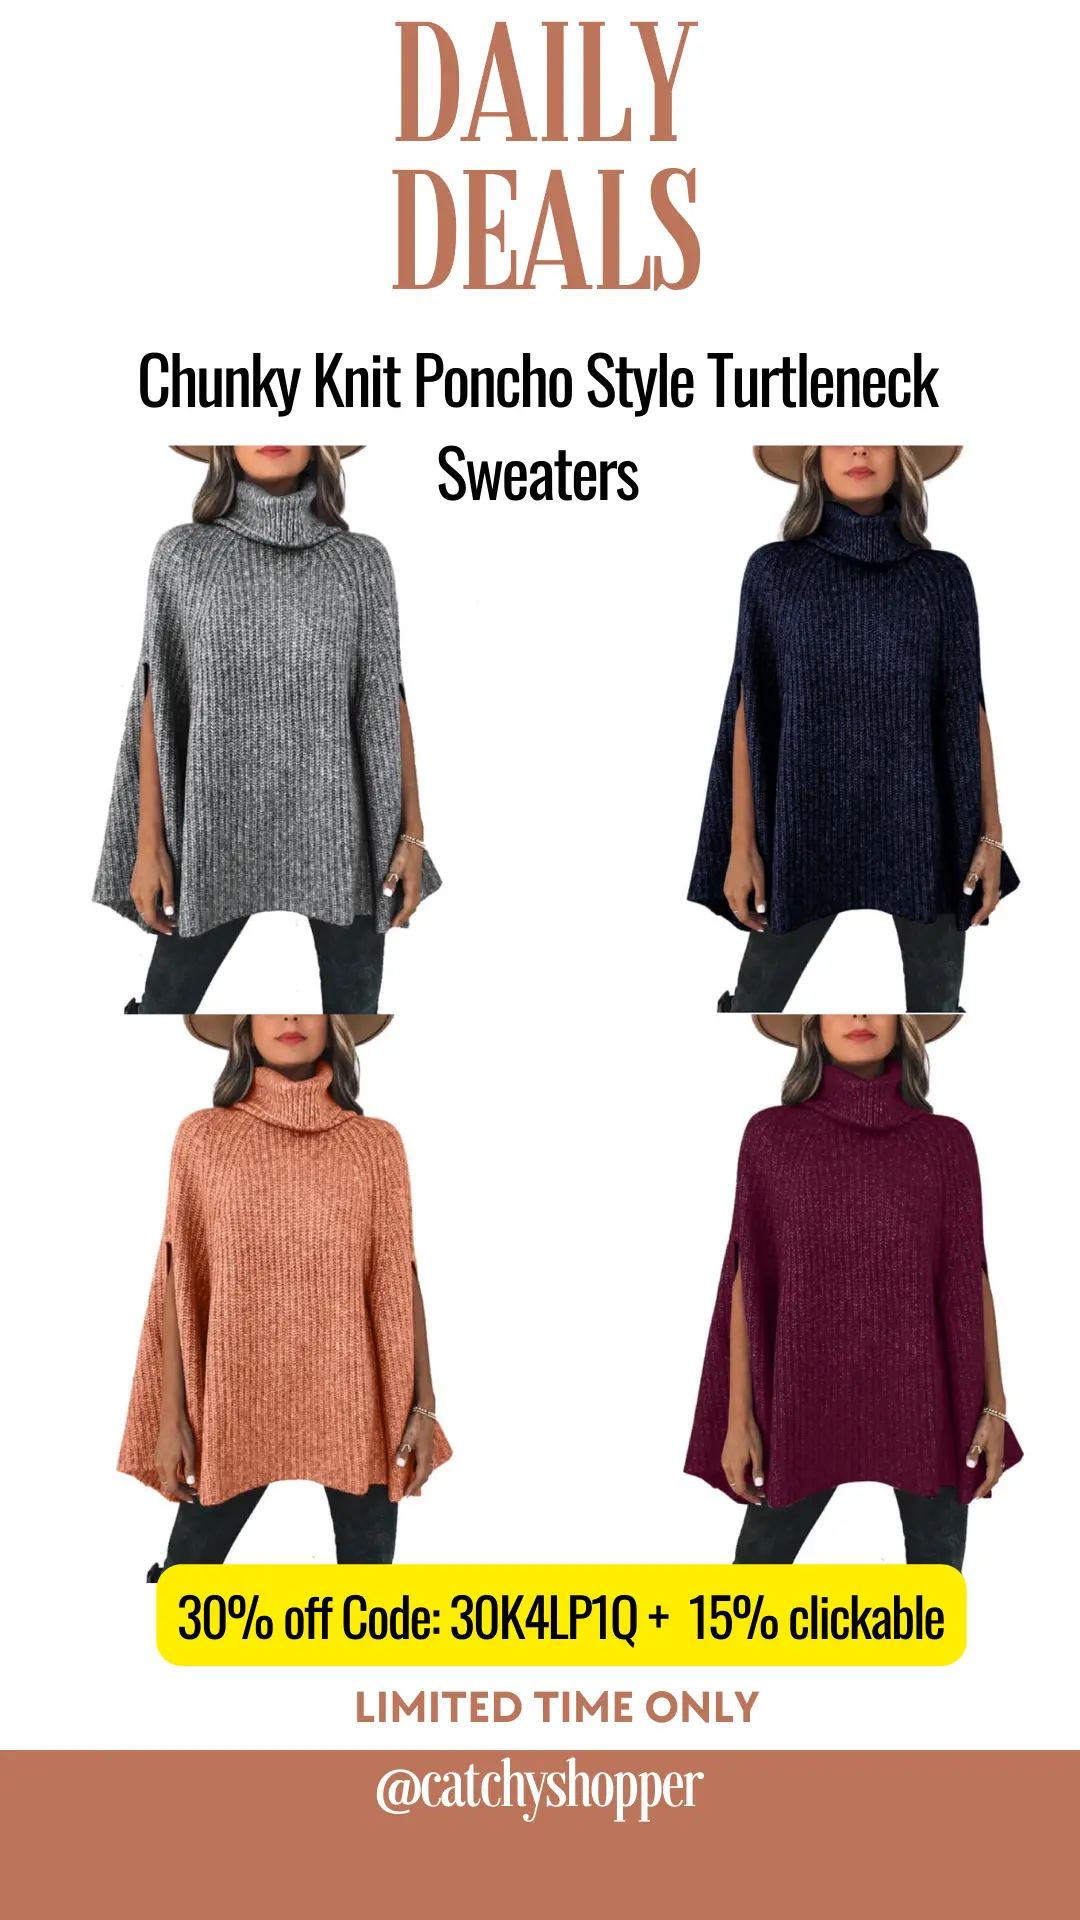 Chunky Knit Poncho Style Turtleneck Sweaters